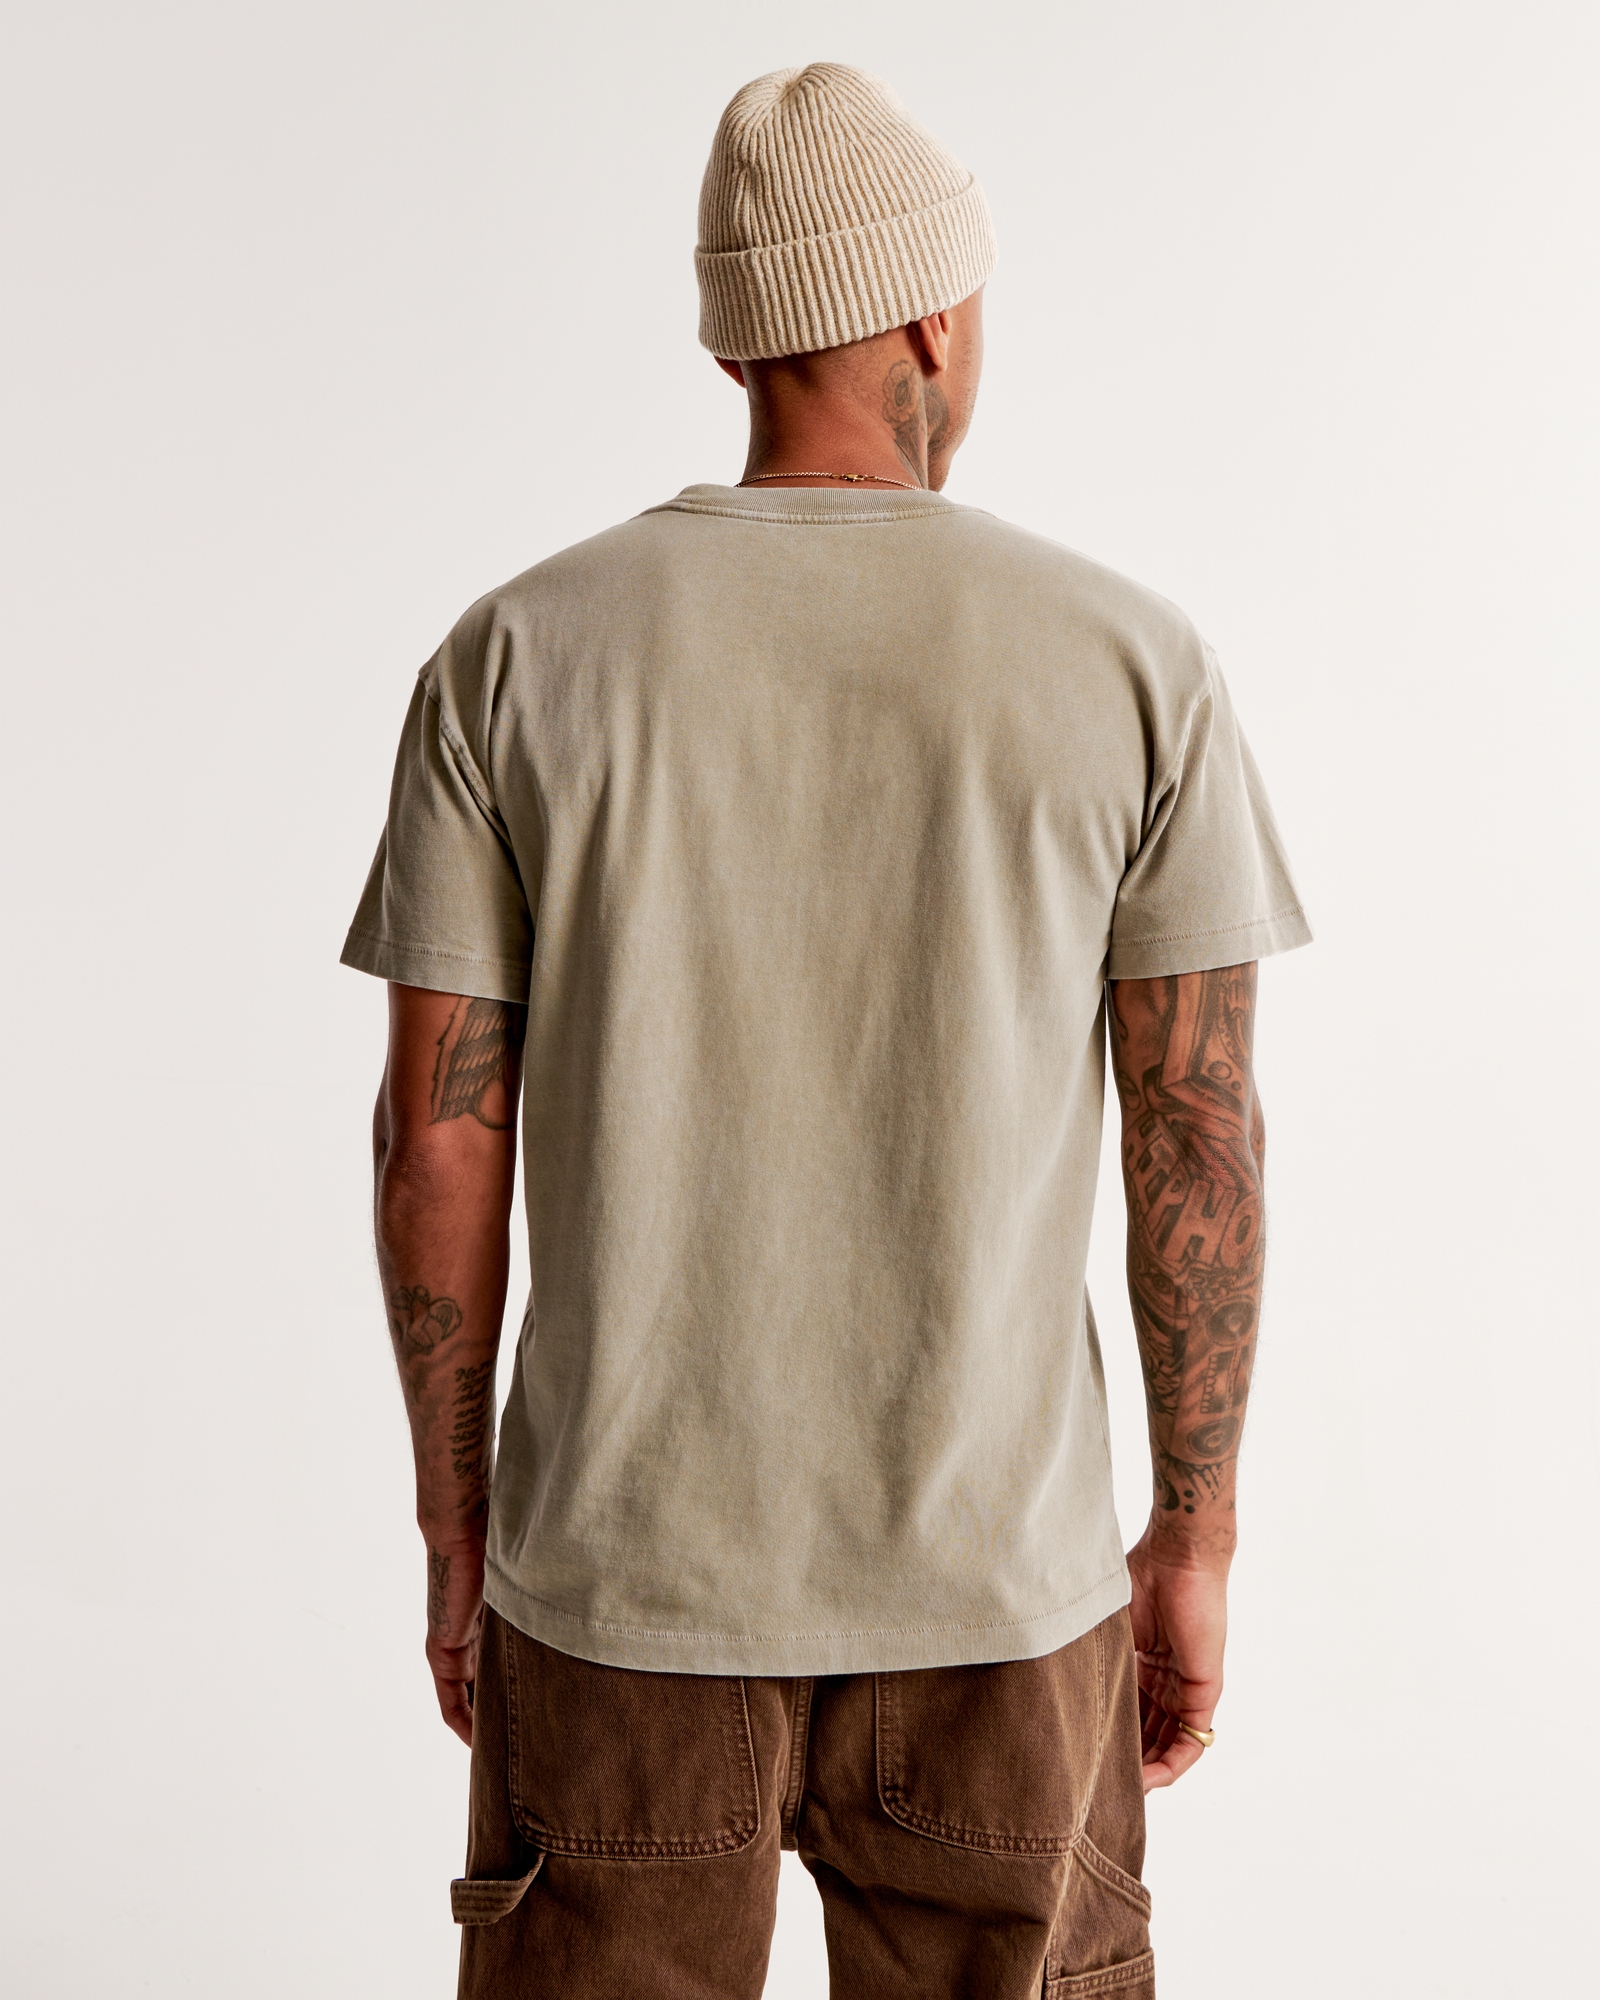 Men's Sequoia Graphic Tee in Light Green Texture | Size XXL Tall | Abercrombie & Fitch